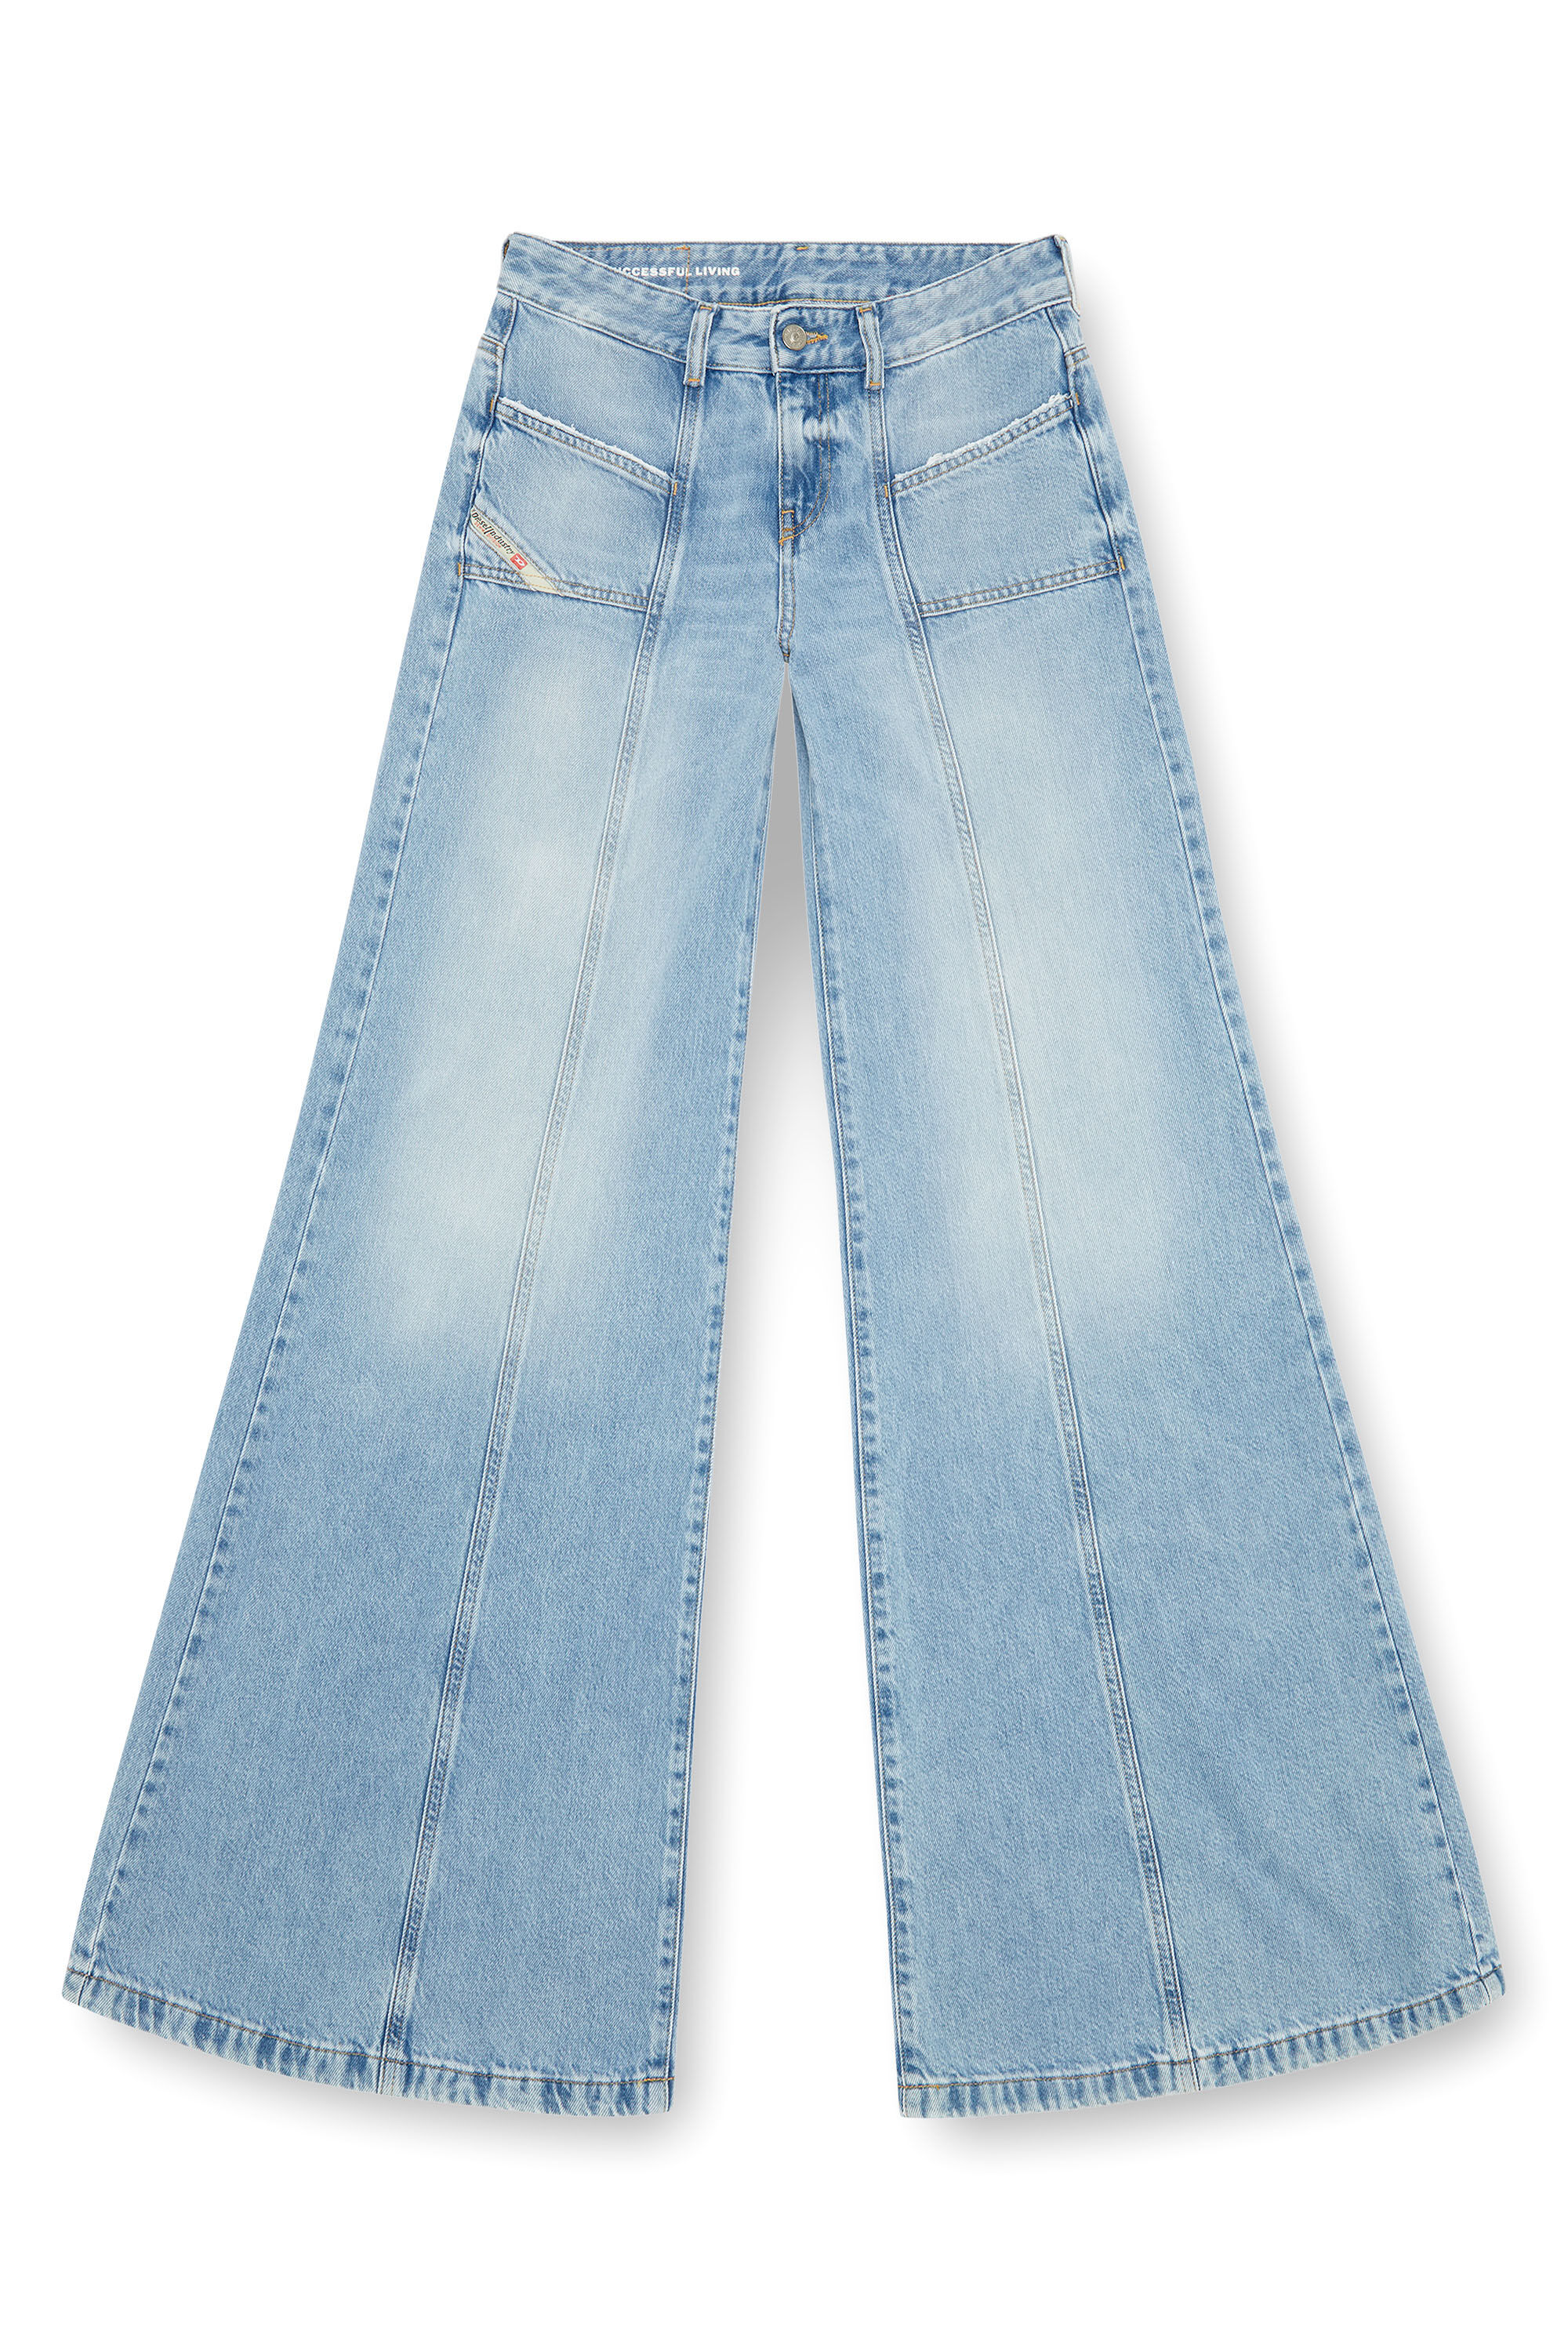 Diesel - Bootcut and Flare Jeans D-Akii 09J88, Mujer Bootcut y Flare Jeans - D-Akii in Azul marino - Image 2